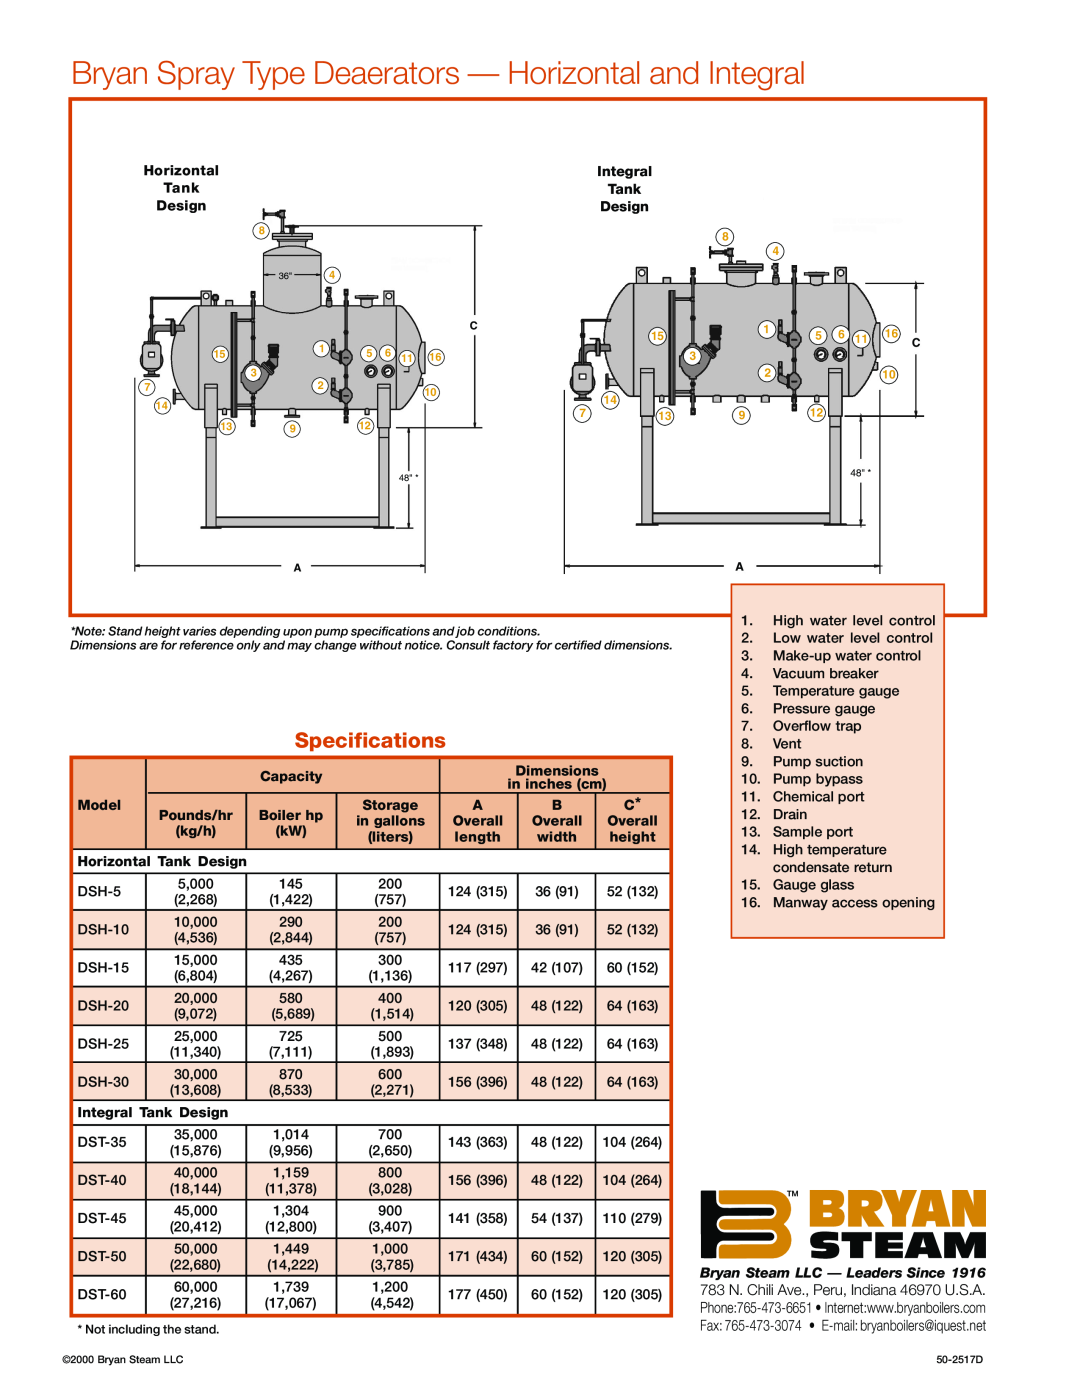 Bryan Boilers DST-40, DST-45, DST-50 Bryan Spray Type Deaerators - Horizontal and Integral, Specifications, Tank, Design 